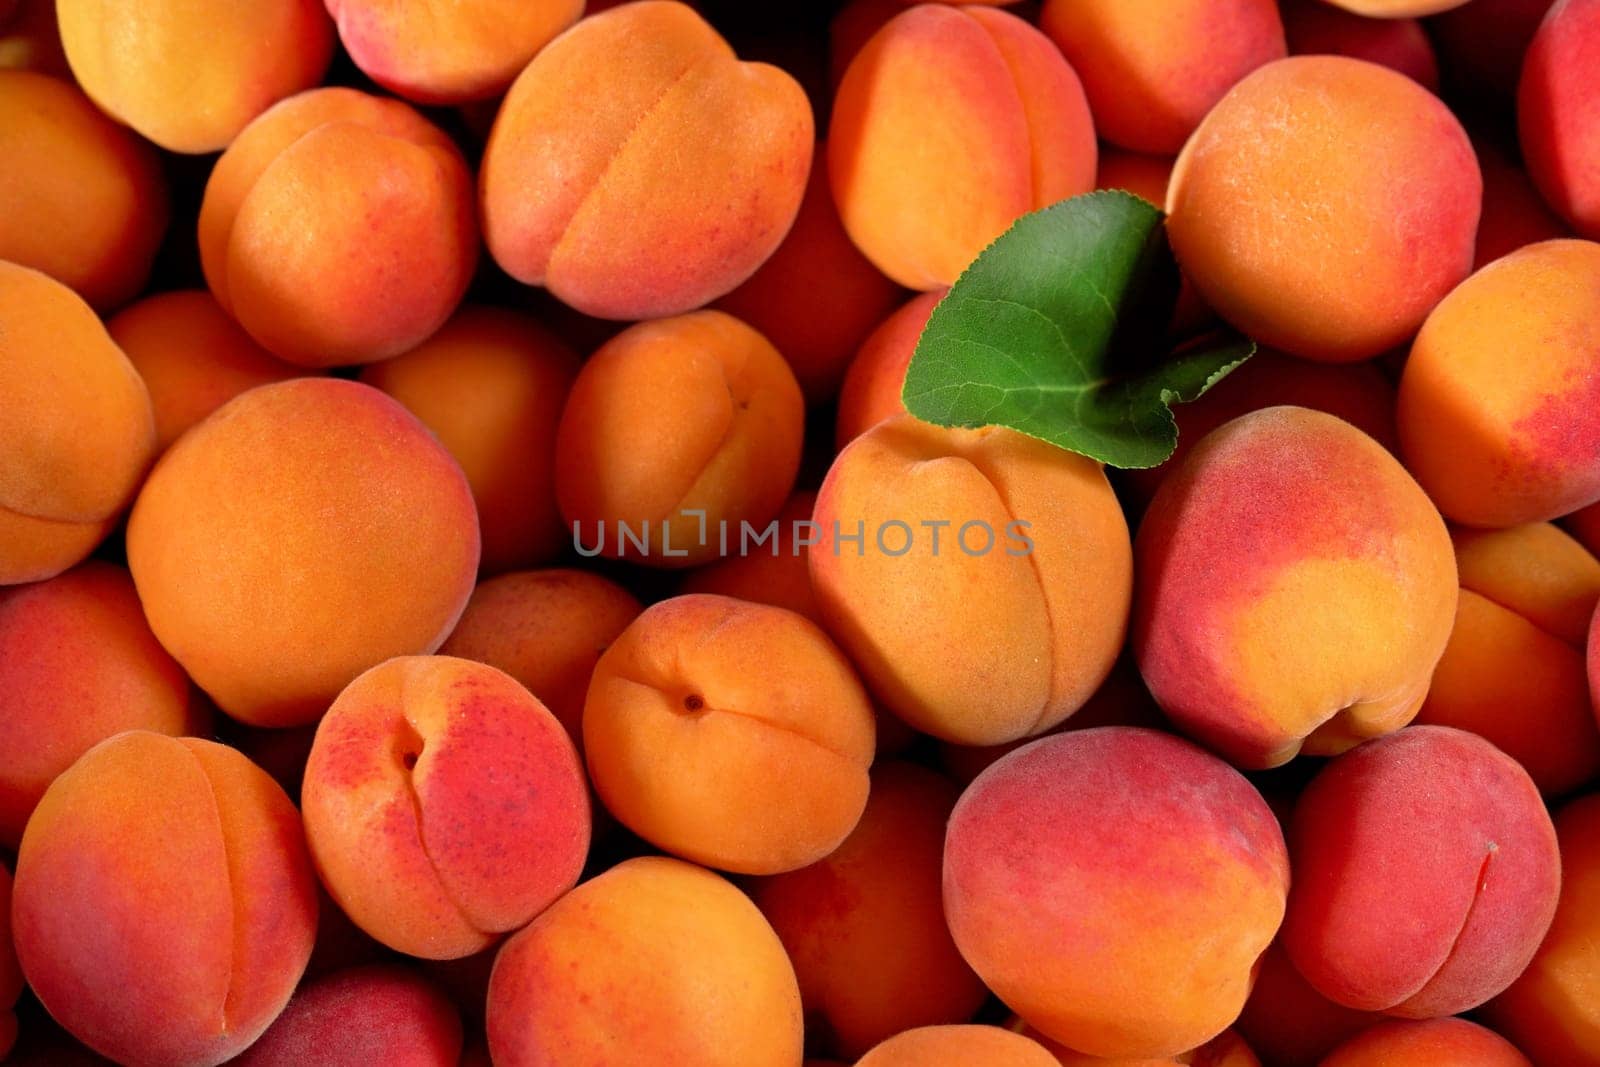 Heap of fresh apricots with one green leaf, closeup detail photo from above